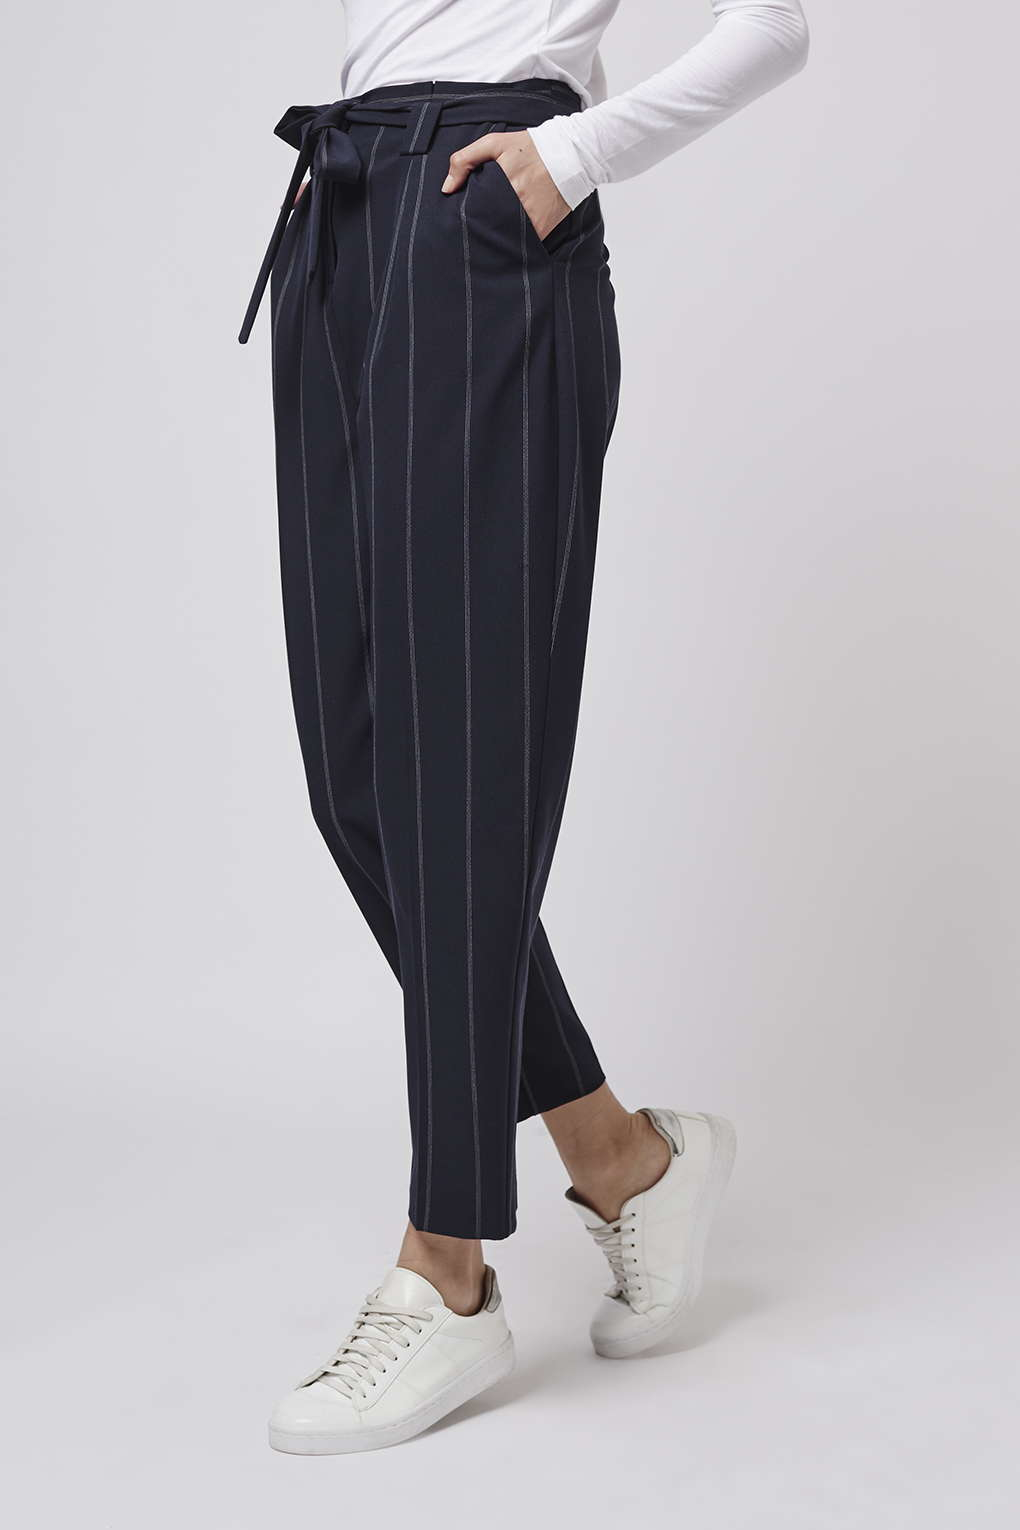 Lyst - Topshop Tall Pinstripe Paperbag Trousers in Blue